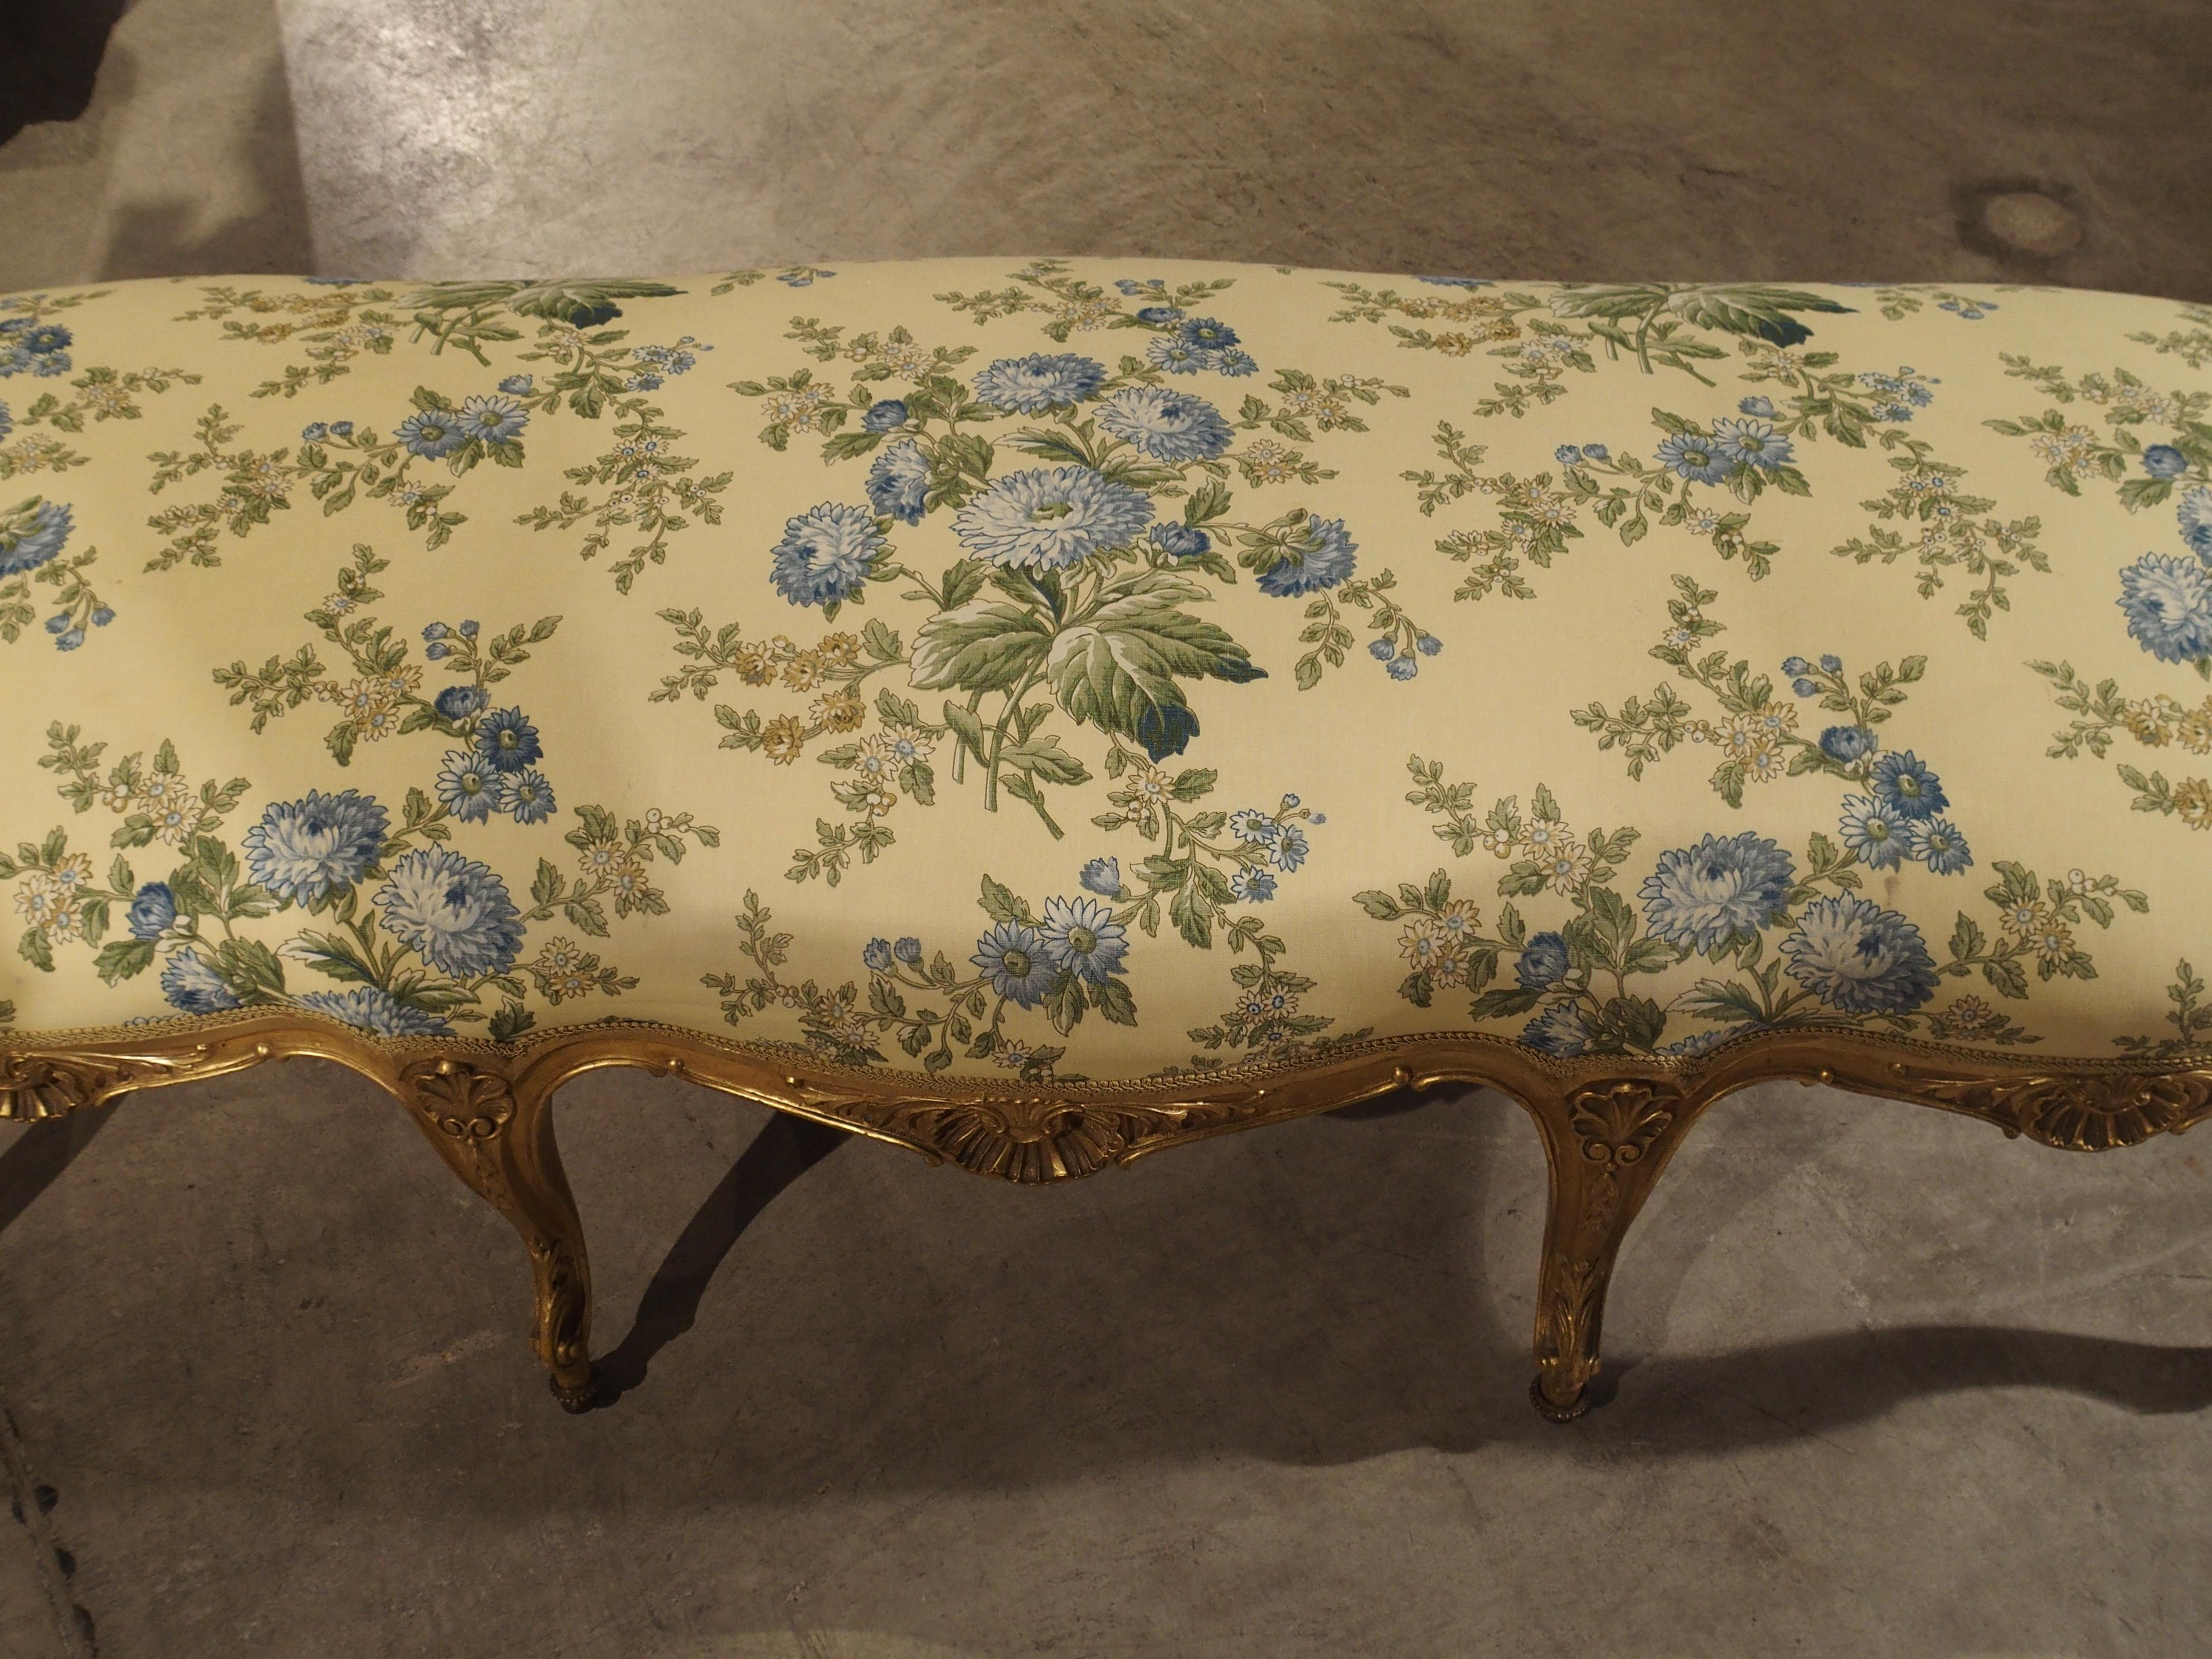 This stunning gilded, eight leg, antique French Regence style banquette dates to the 19th century. It has been reupholstered in a fabric with a pale yellow ground having stems of large pale blue Chrysanthemums and smaller stems of pale blue